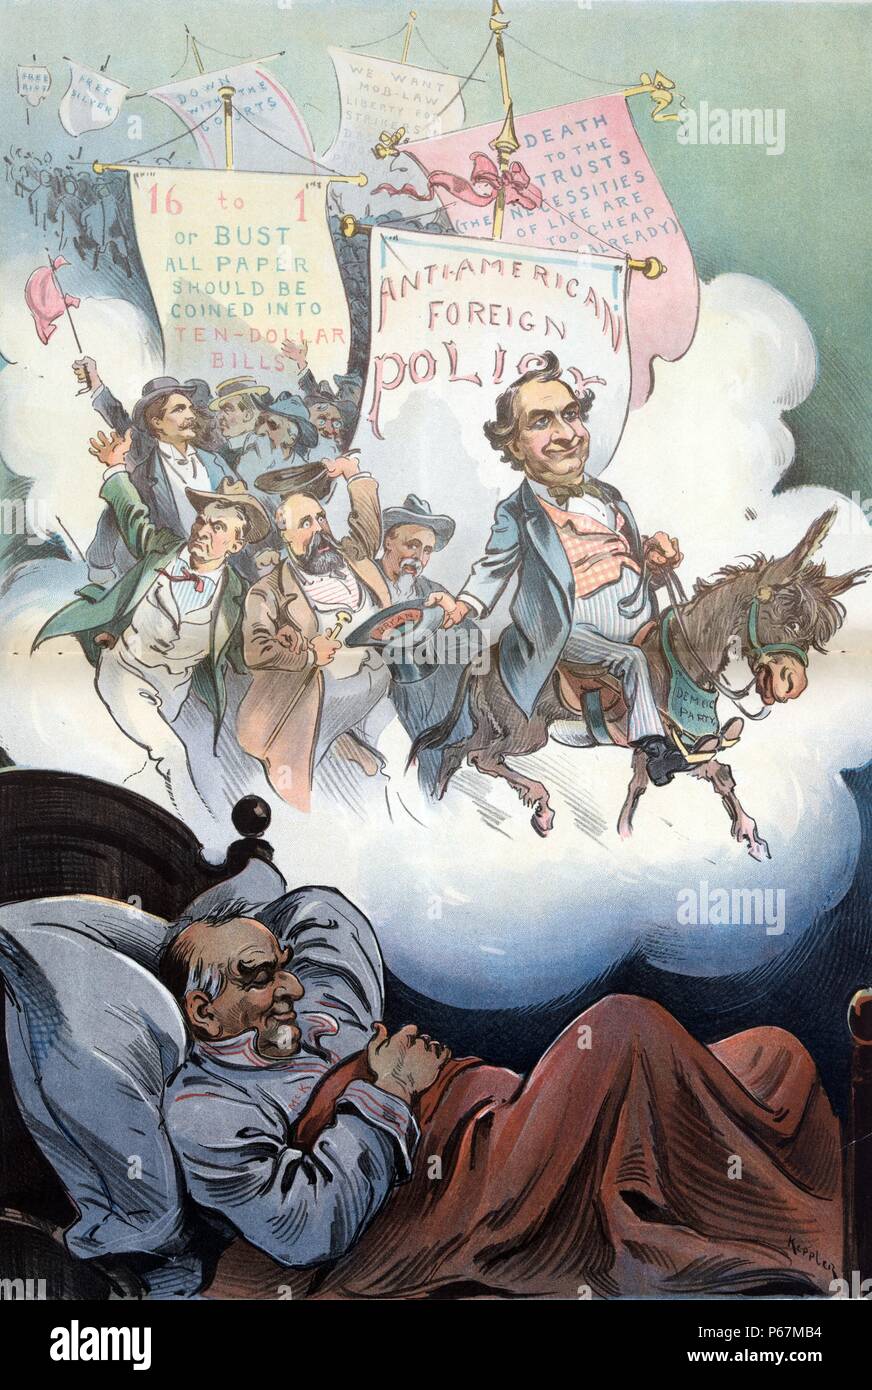 Sweet dreams' Print shows President William McKinley asleep in bed dreaming of William Jennings Bryan riding the Democratic donkey and leading members of the Democratic Party down the path of 'Anti-American Foreign Policy', '16 to 1 or Bust. All paper should be coined into Ten-Dollar Bills', 'Death to Trusts. (The necessities of life are too cheap already)', 'Down with the Courts', and 'Free Silver'. Stock Photo